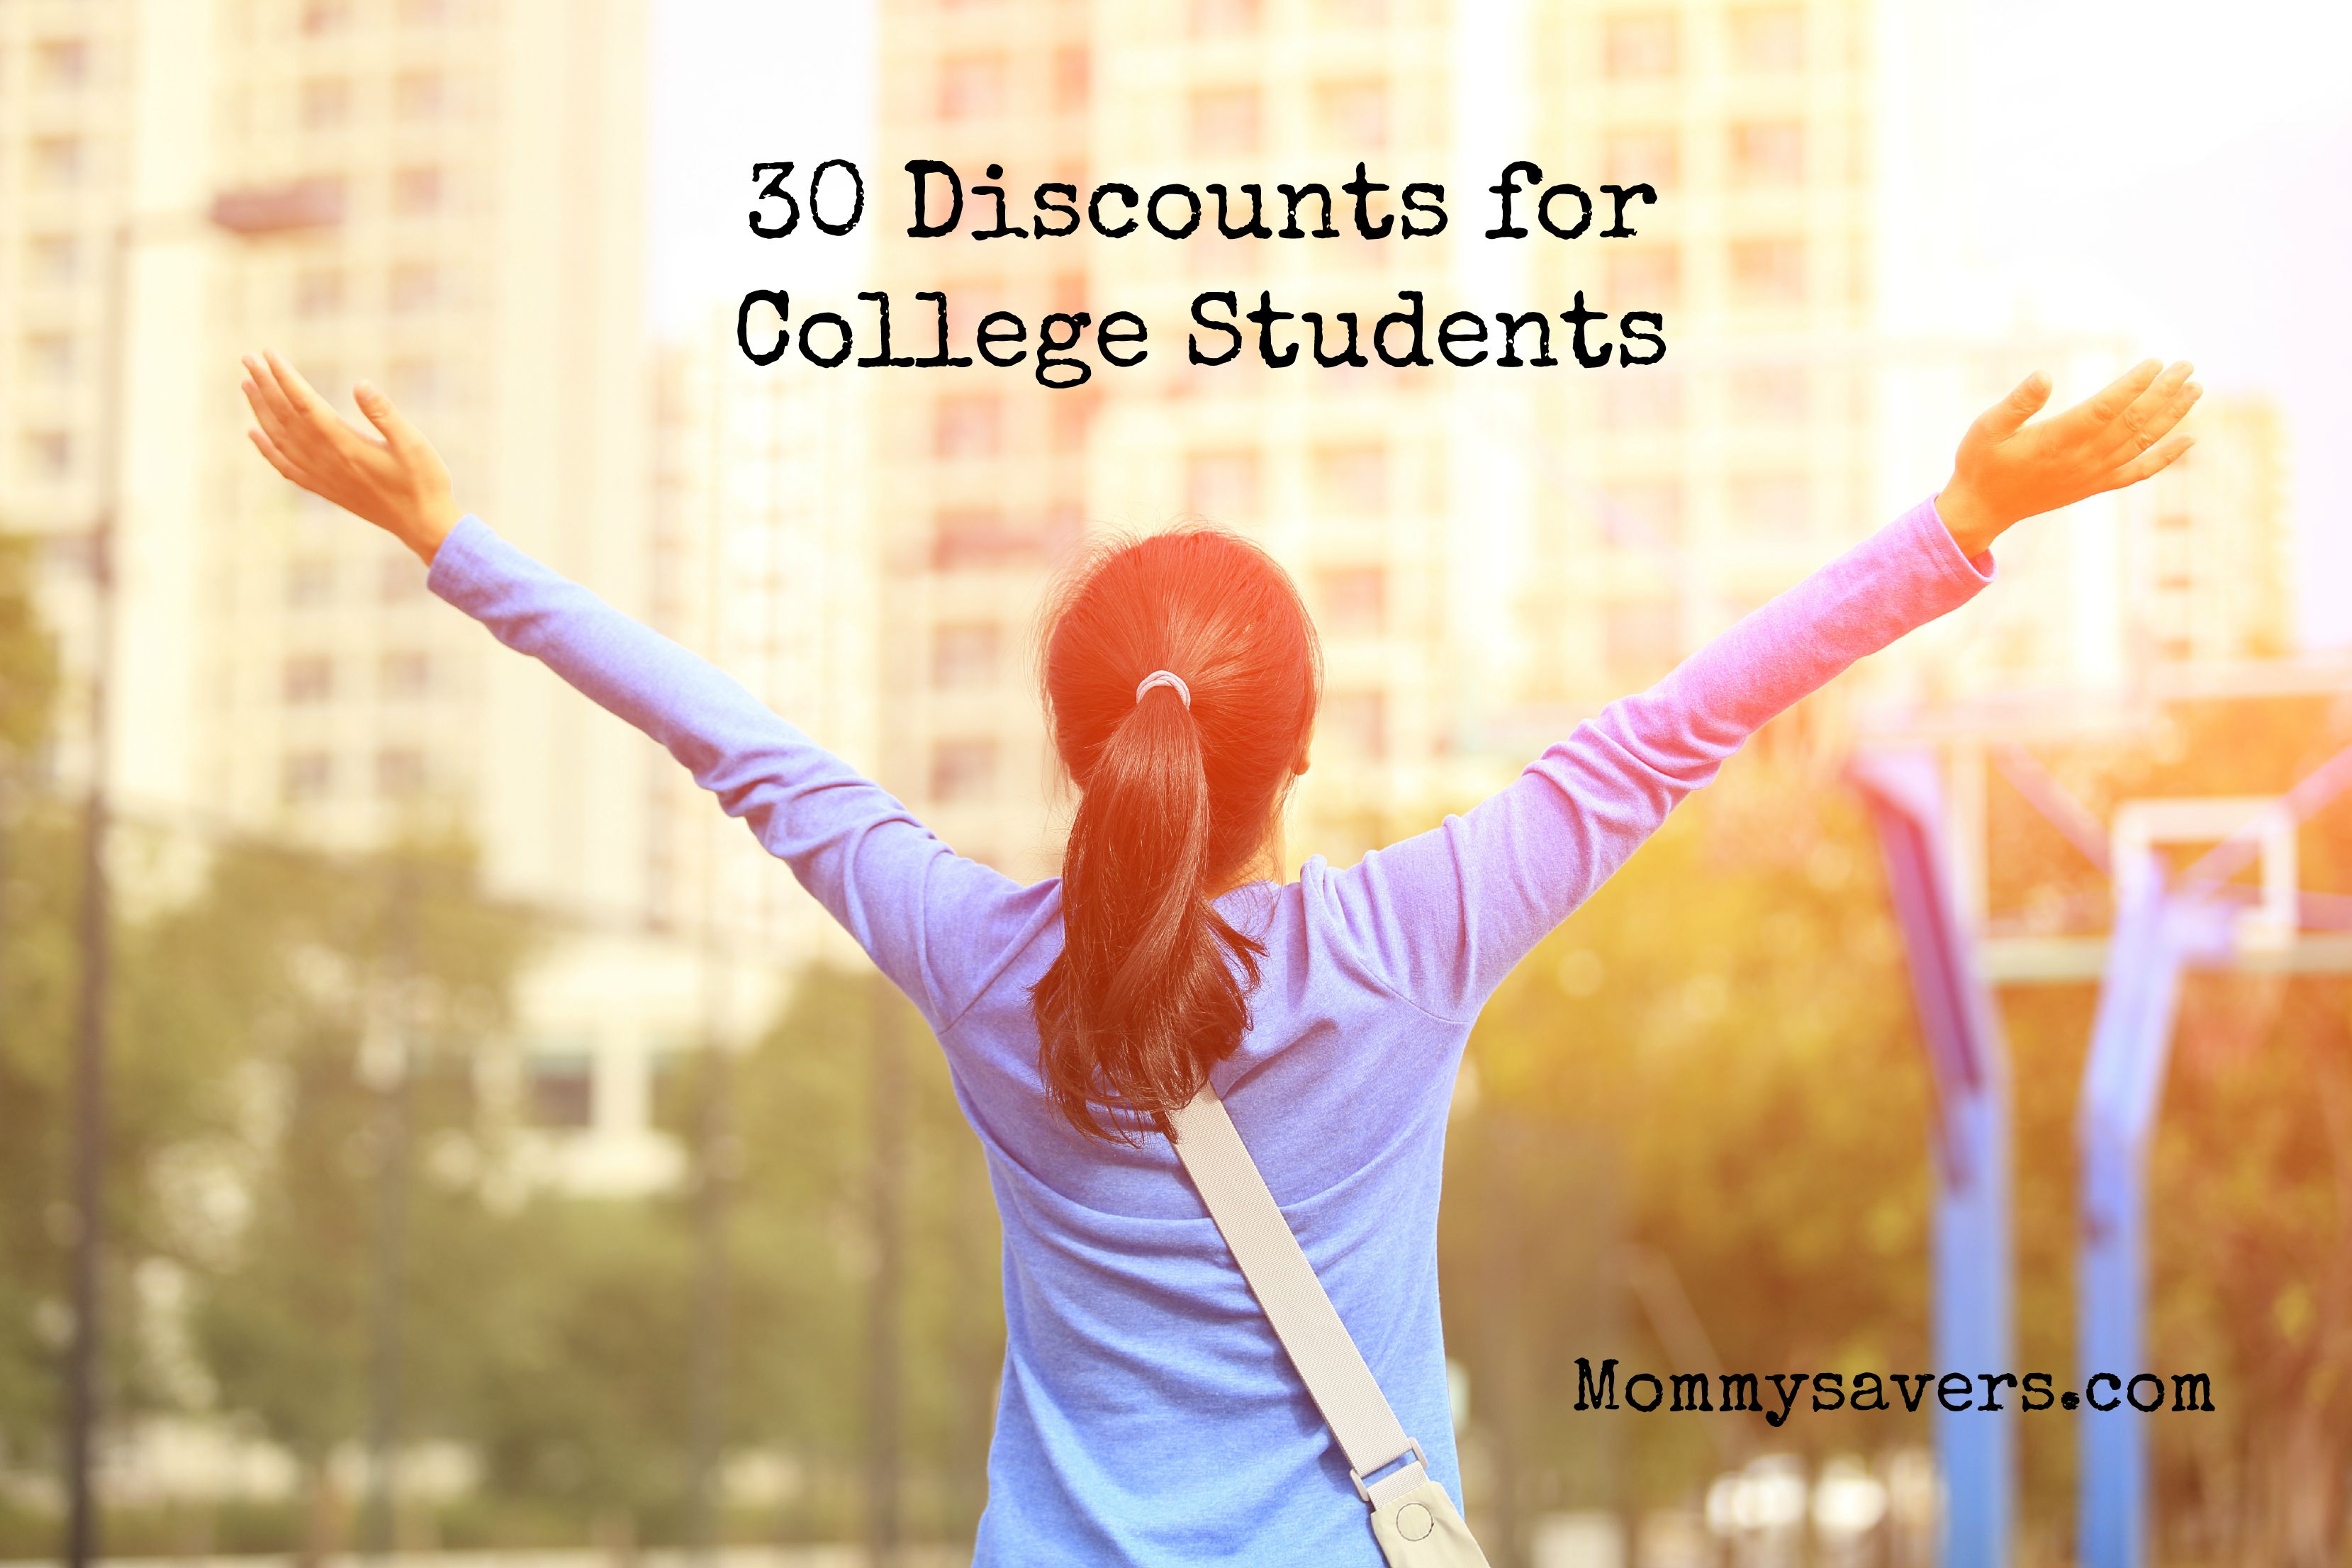 30-discounts-for-college-students-mommysavers